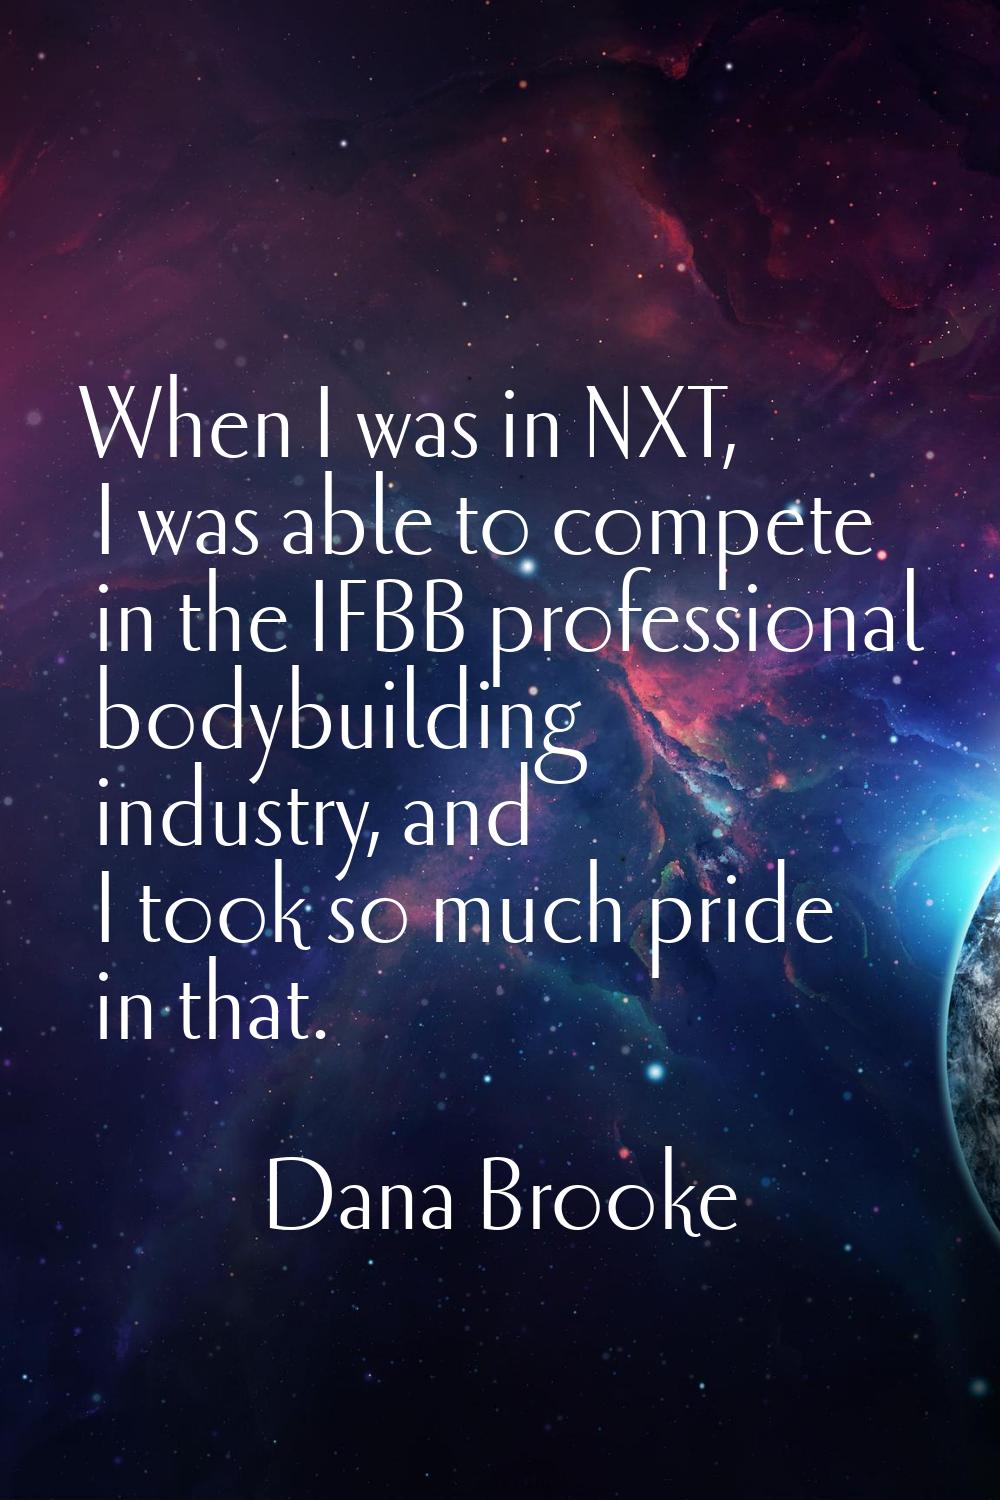 When I was in NXT, I was able to compete in the IFBB professional bodybuilding industry, and I took